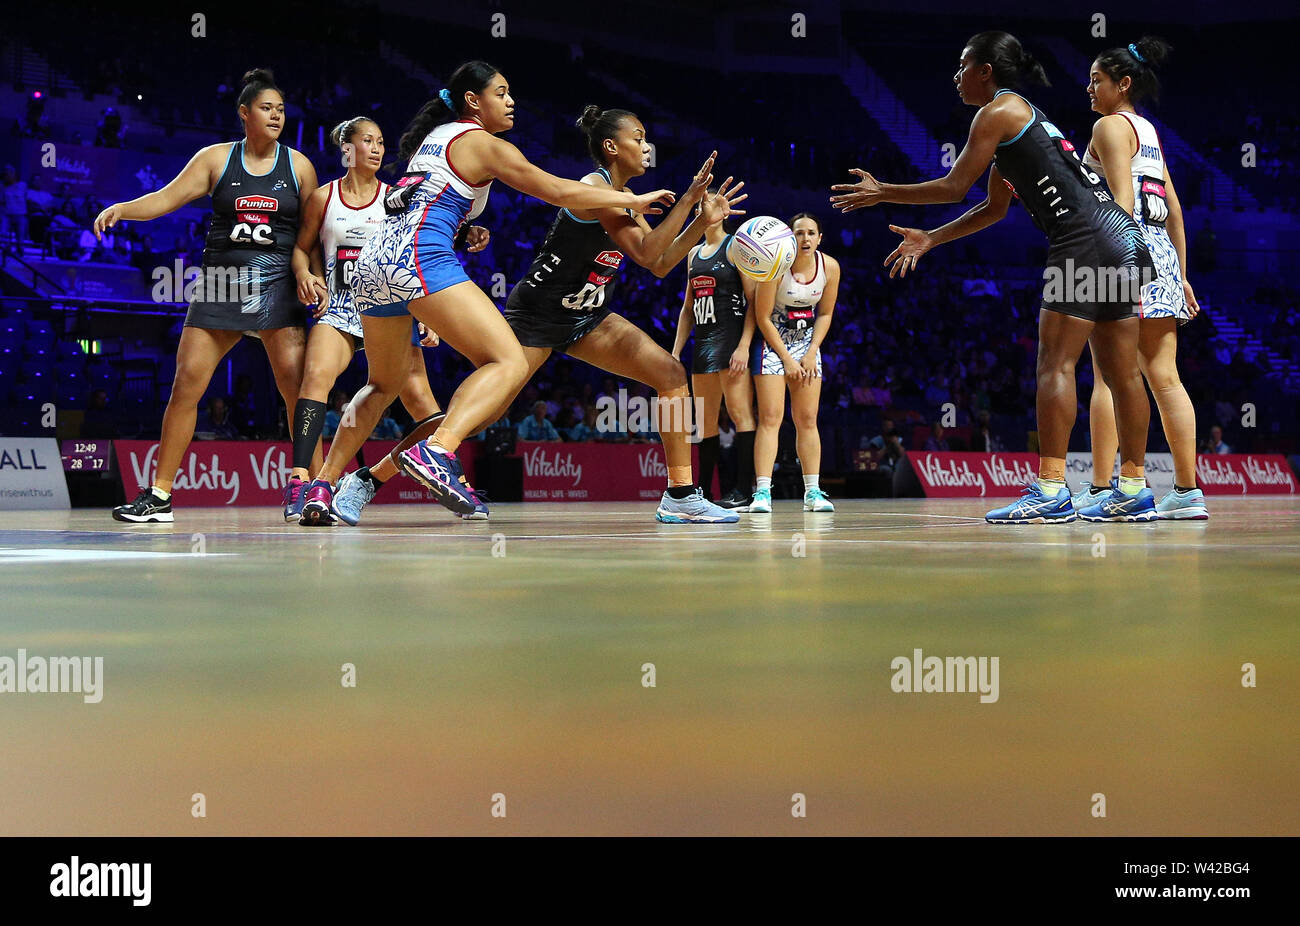 A general view of match action between Samoa and Fiji during the Netball World Cup match at the M&S Bank Arena, Liverpool. Stock Photo